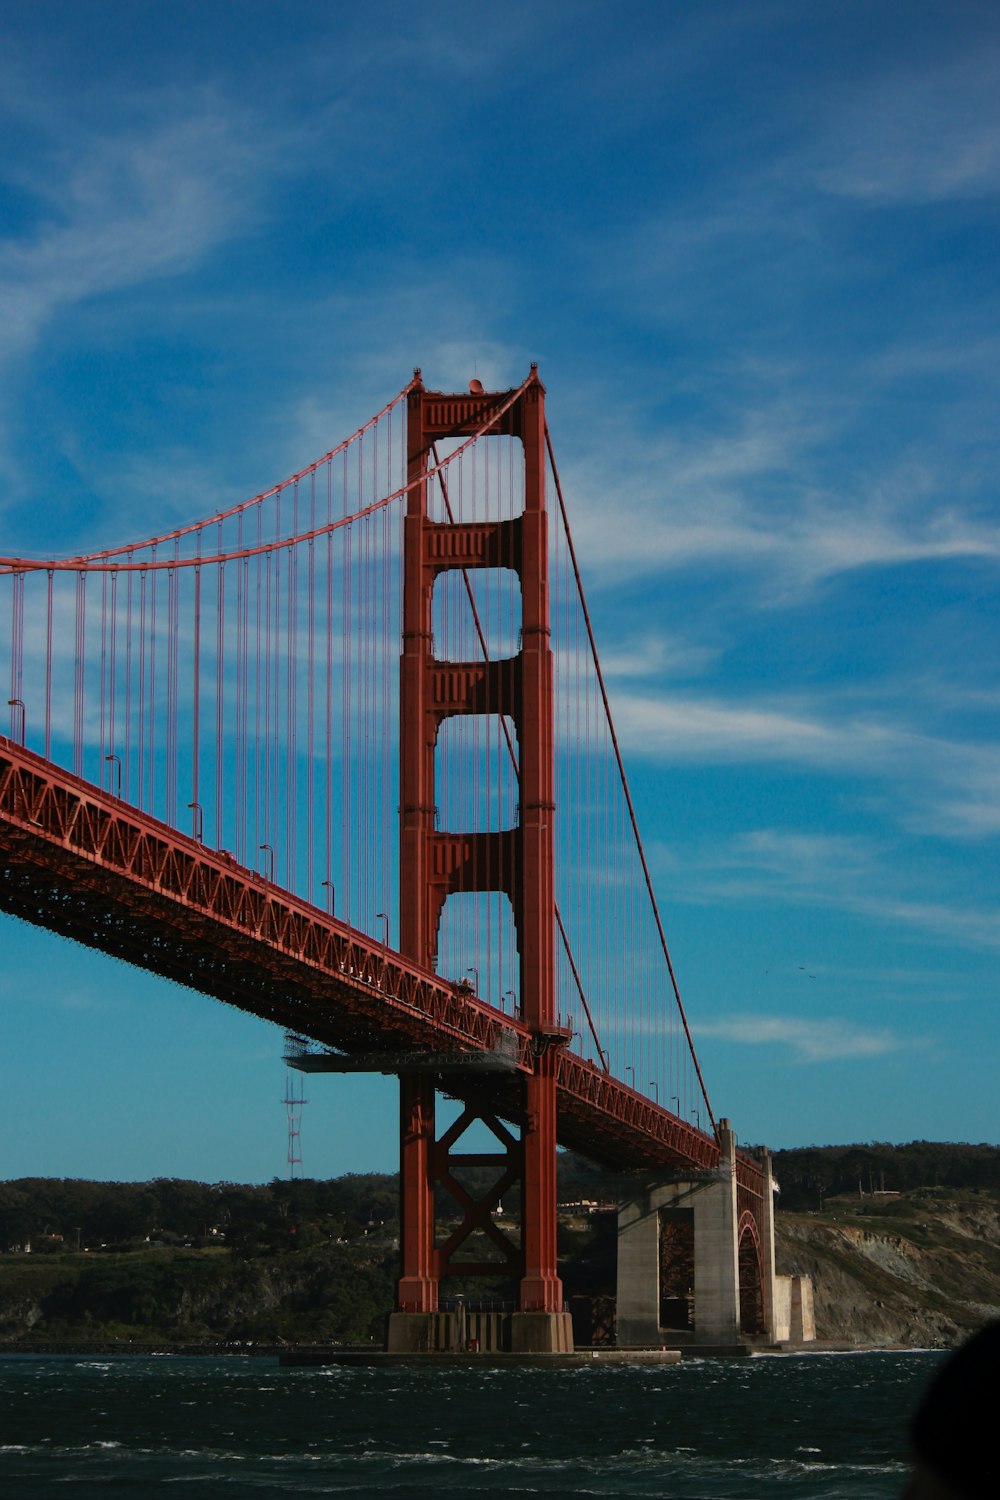 a large red bridge with Golden Gate Bridge in the background